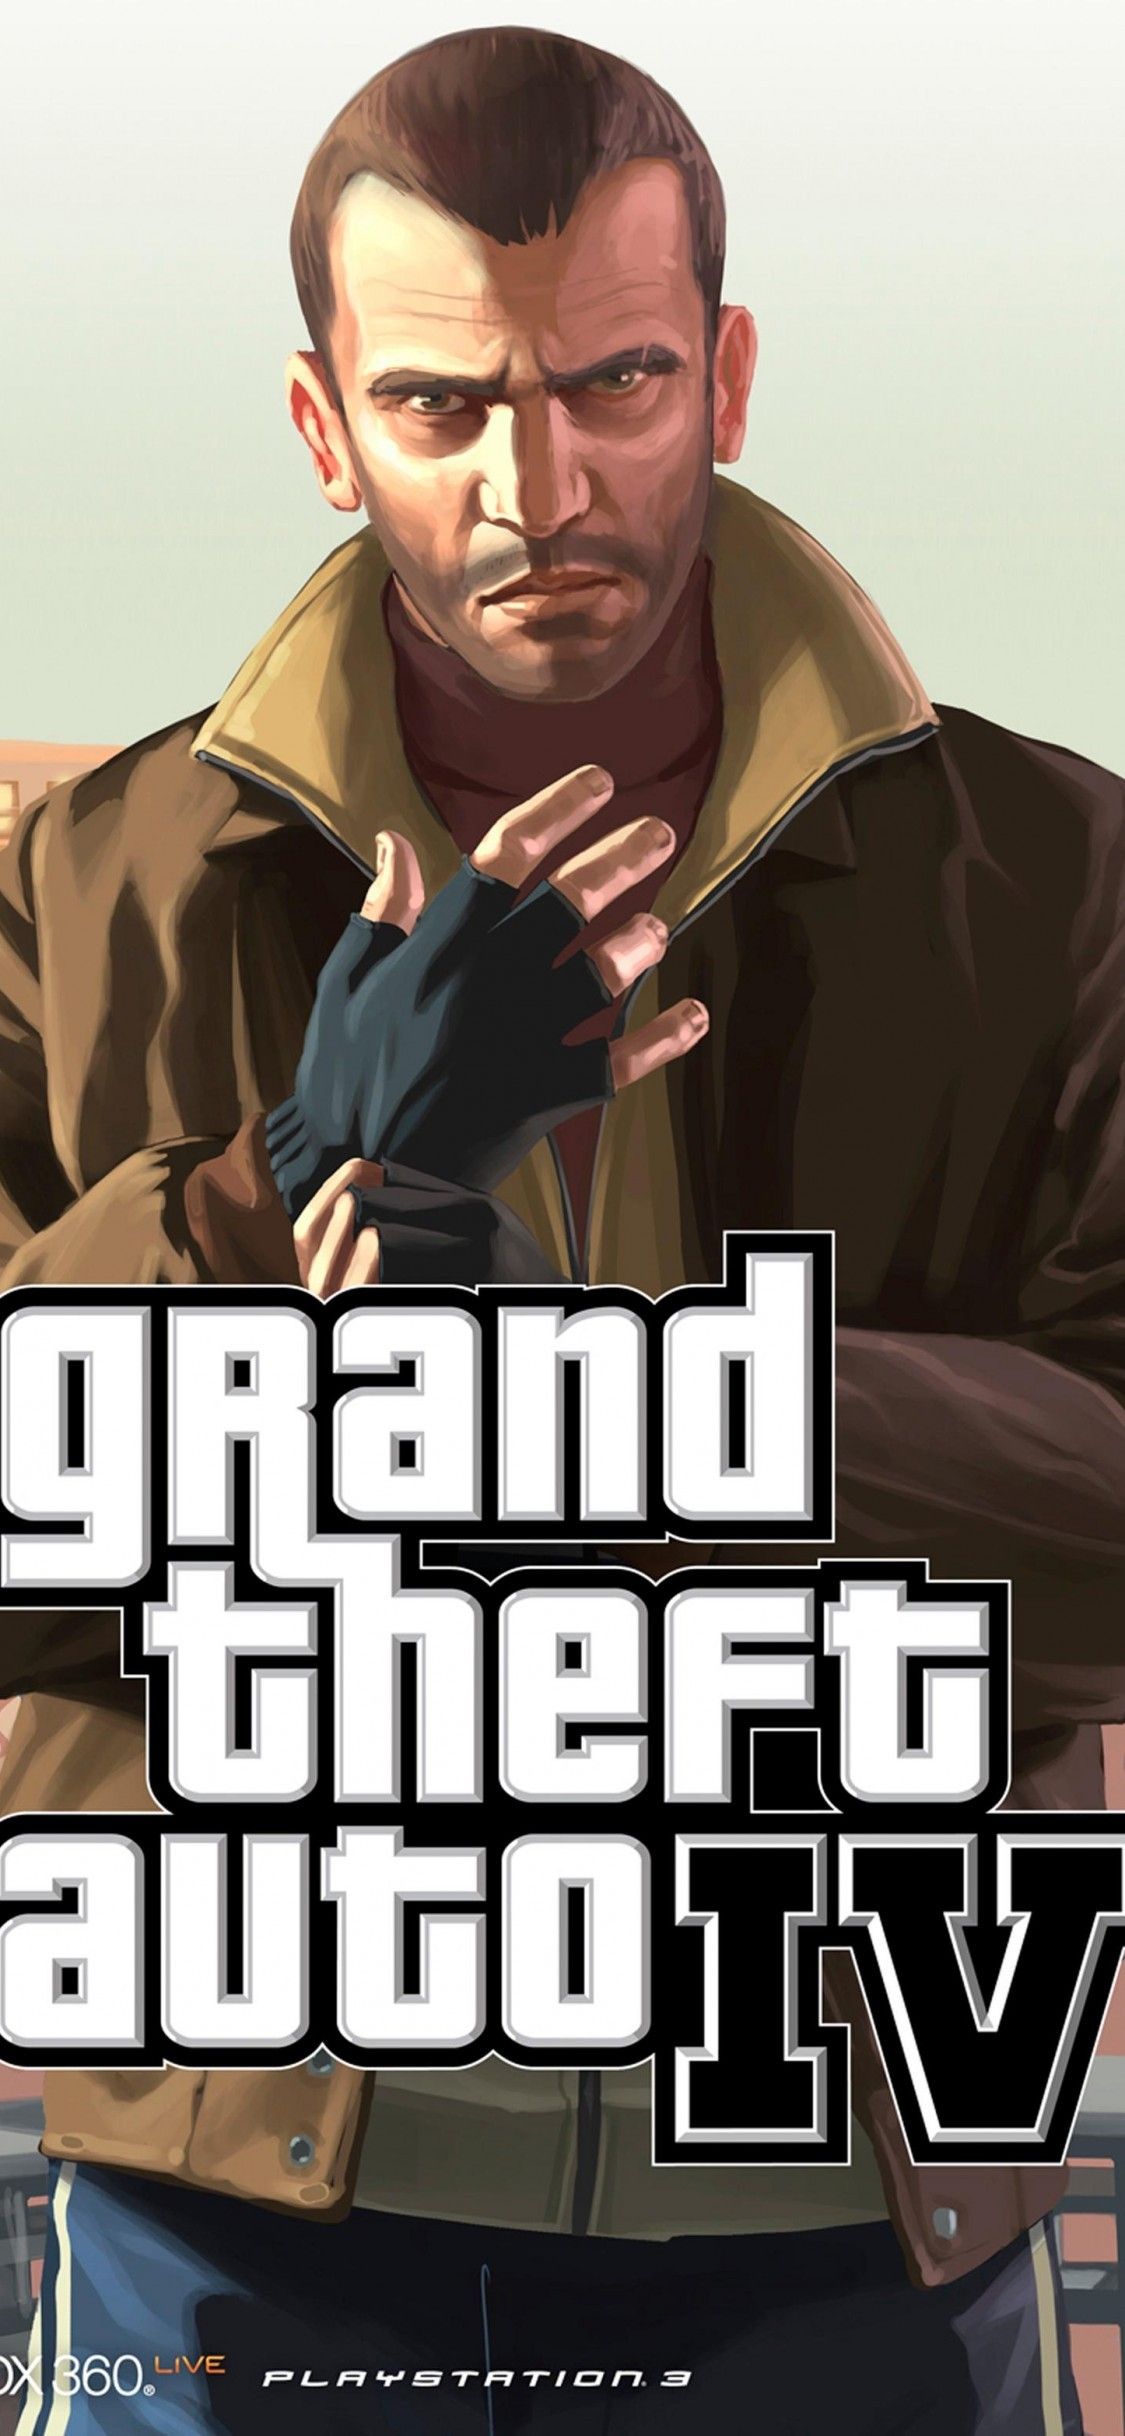 720x1280 Gta iv Wallpapers for Mobile Phone HD